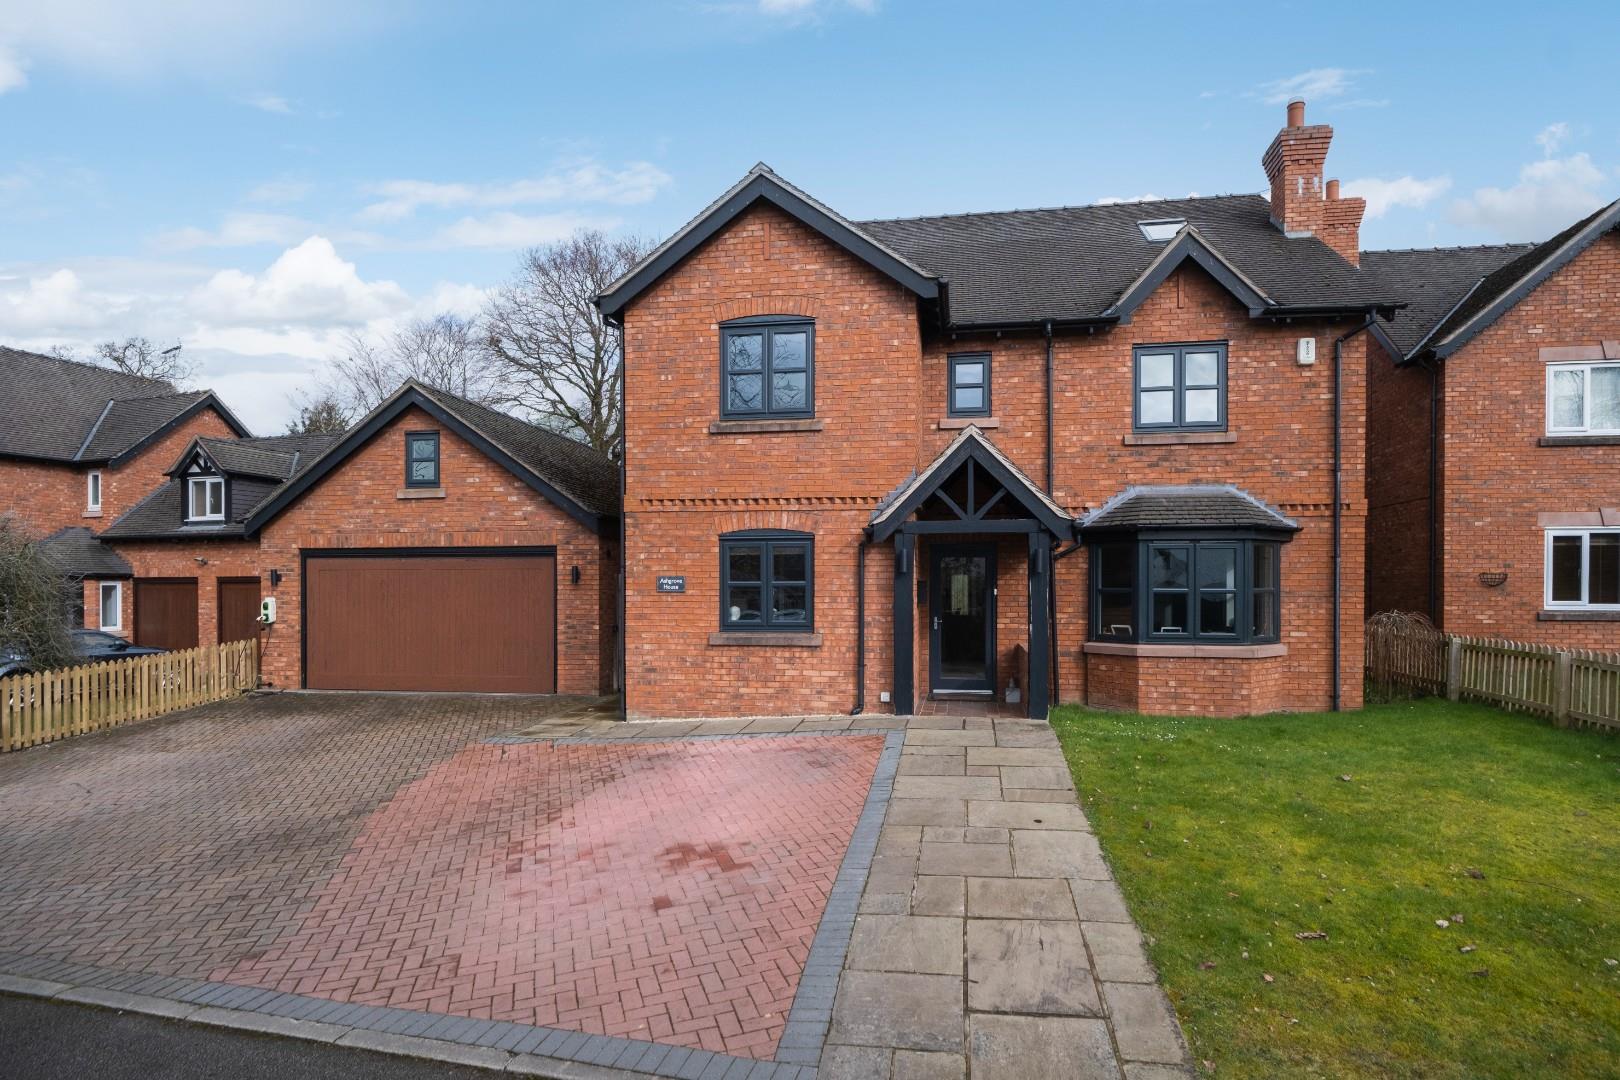 6 bedroom  Detached House for Sale in Northwich